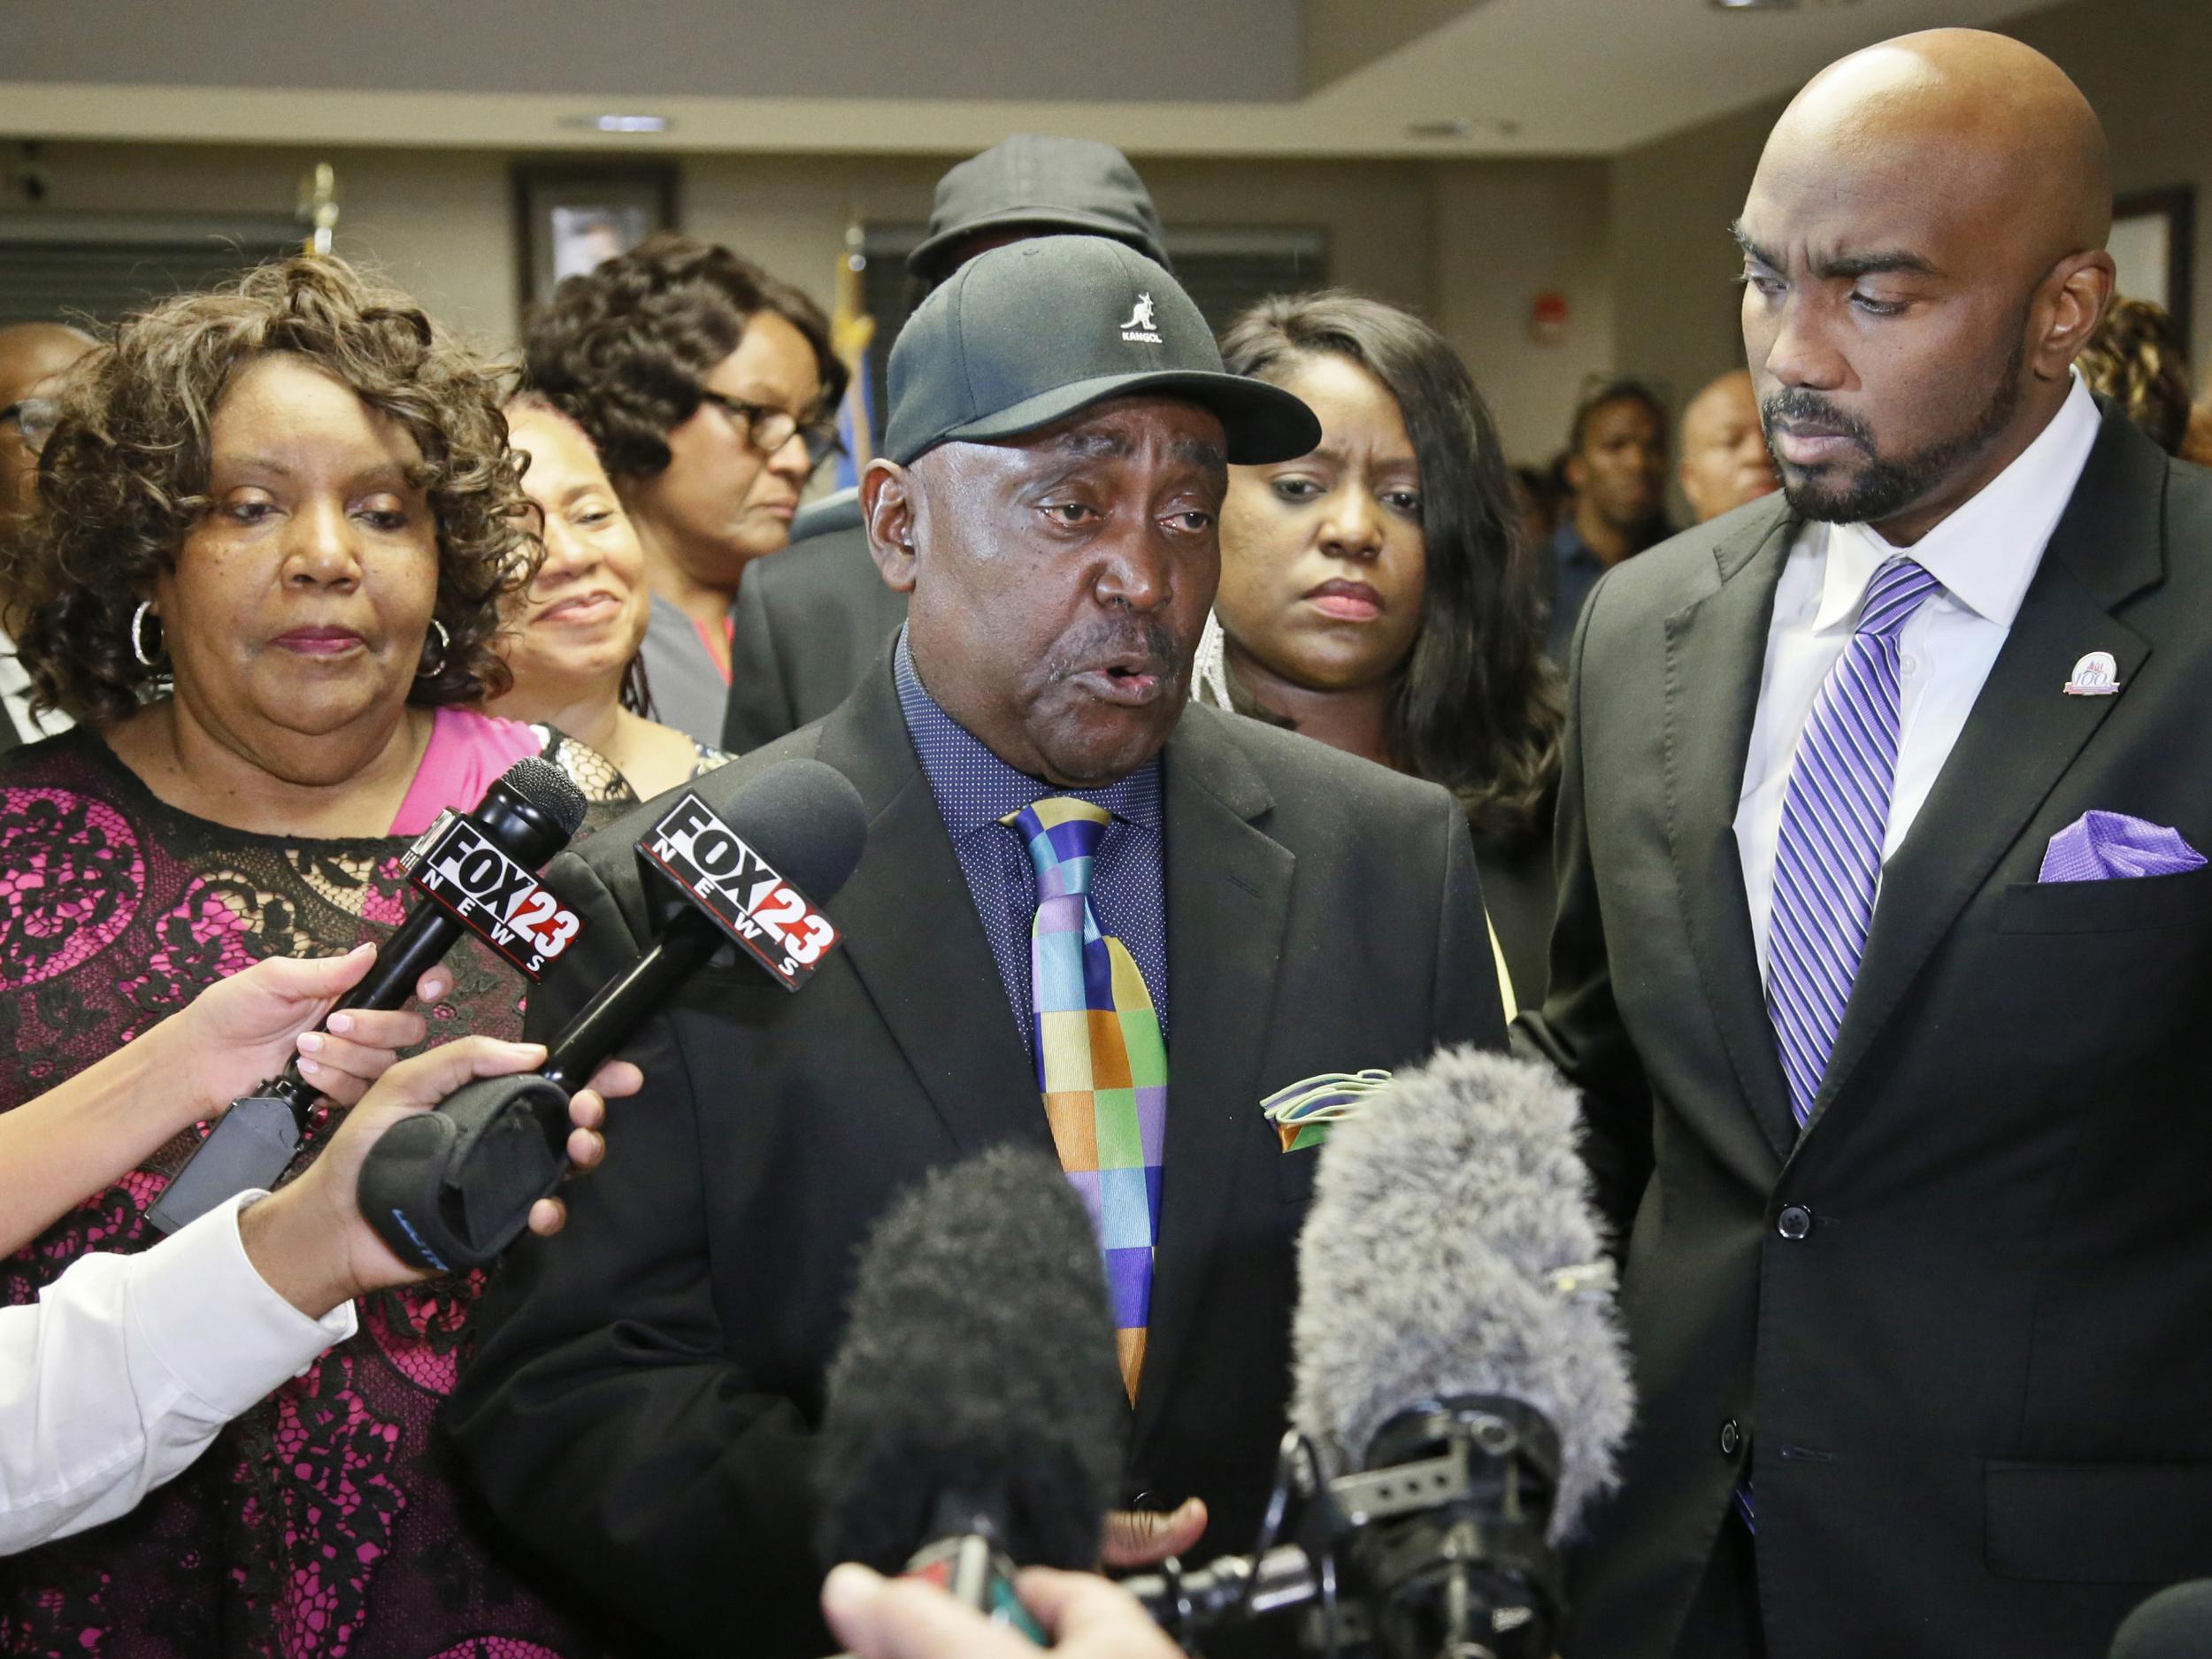 The Reverend Joey Crutcher, father of Terence Crutcher, talks with the media following the verdict in the trial of Betty Shelby in Tulsa